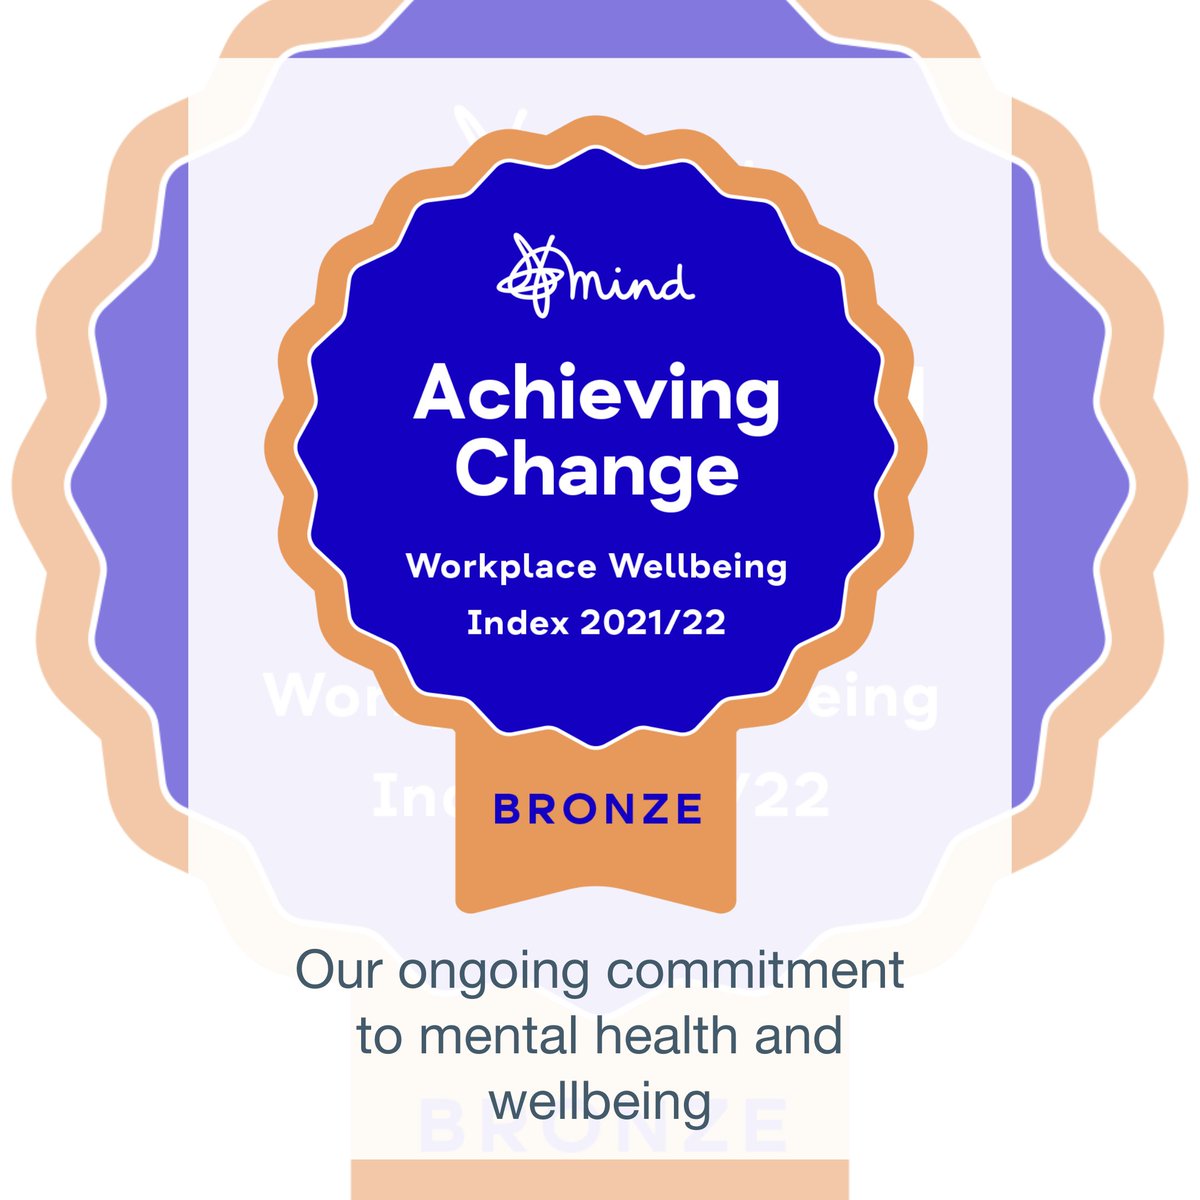 We have been awarded Bronze in @MindCharity's Workplace #Wellbeing Awards. A Bronze award means we are achieving change when it comes to addressing #mentalhealth in our workplace, but we understand that there is always more we can do. #MentalHealthAwareness